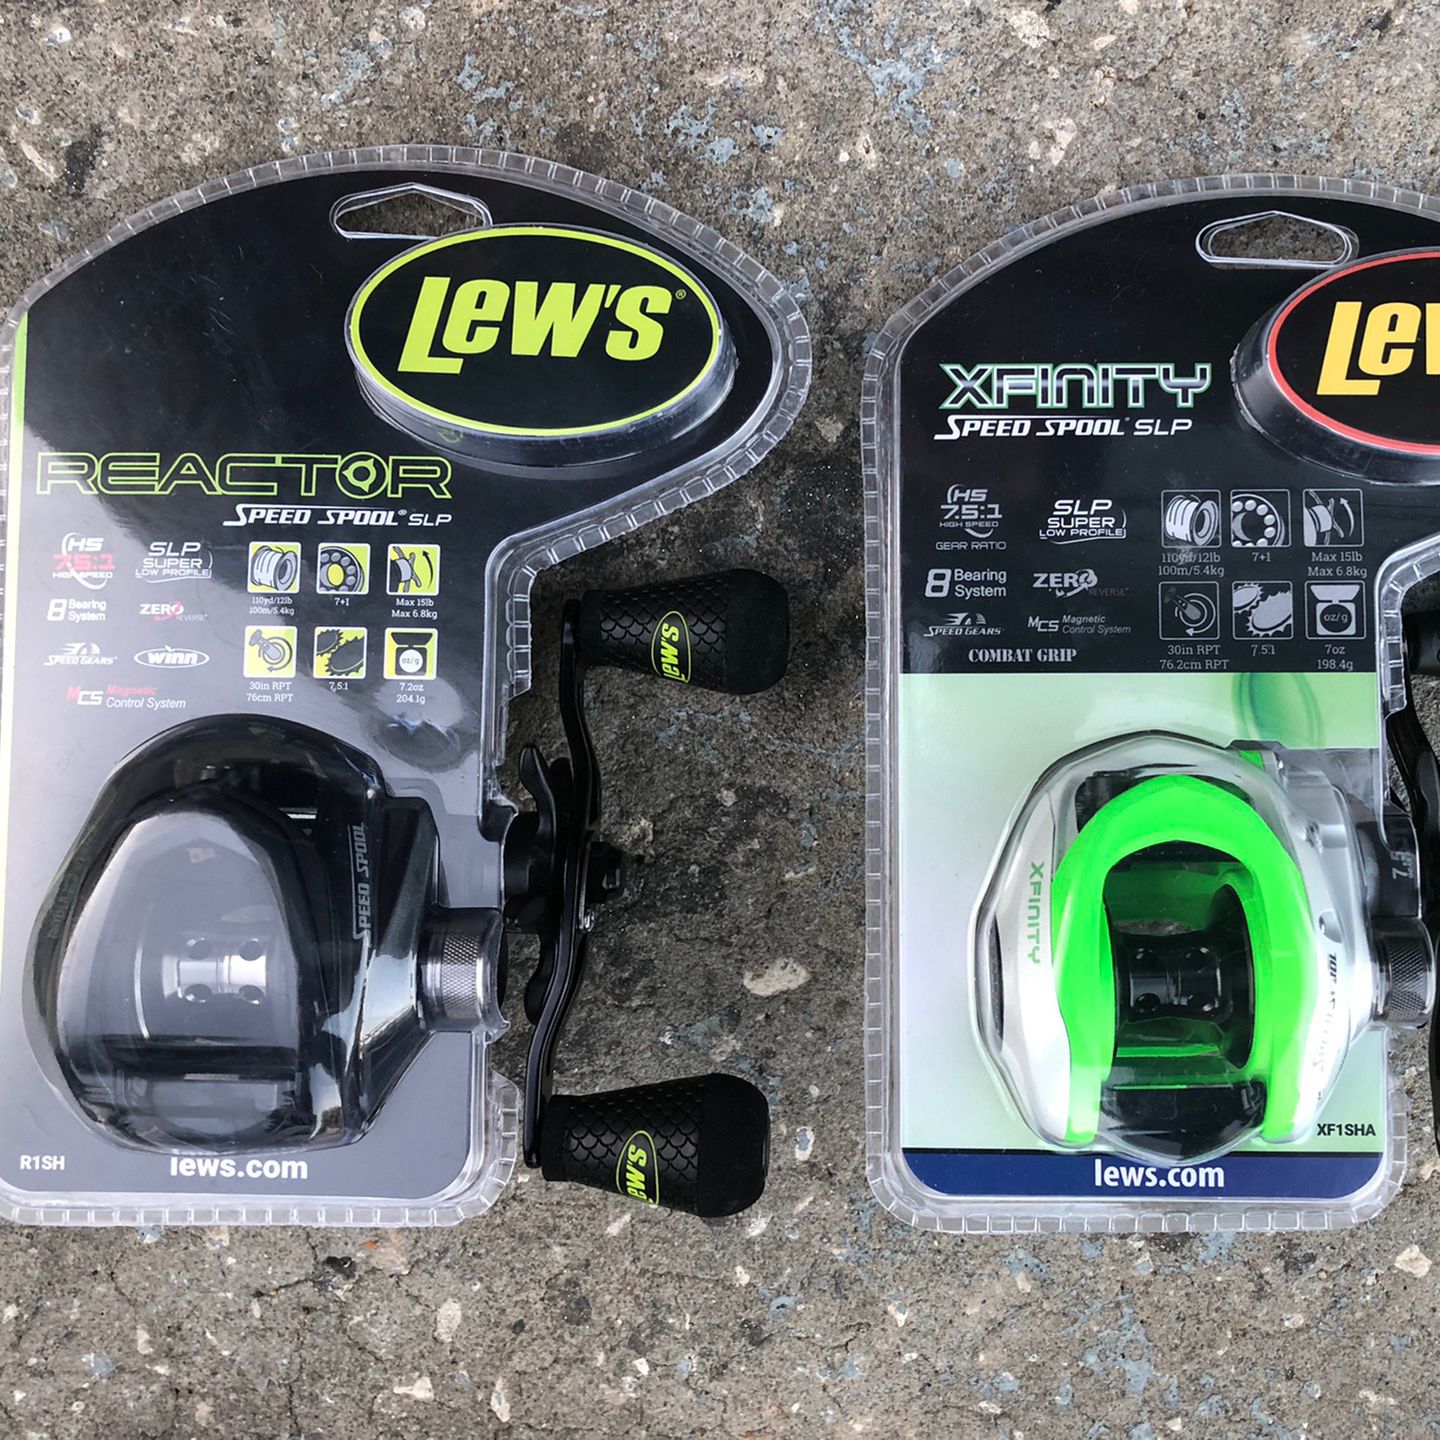 Lew's Reactor & Lew's XFinity Baitcaster Fishing Reels . Brand New Unopened  Packackages. Both Reels For $80 for Sale in Seffner, FL - OfferUp